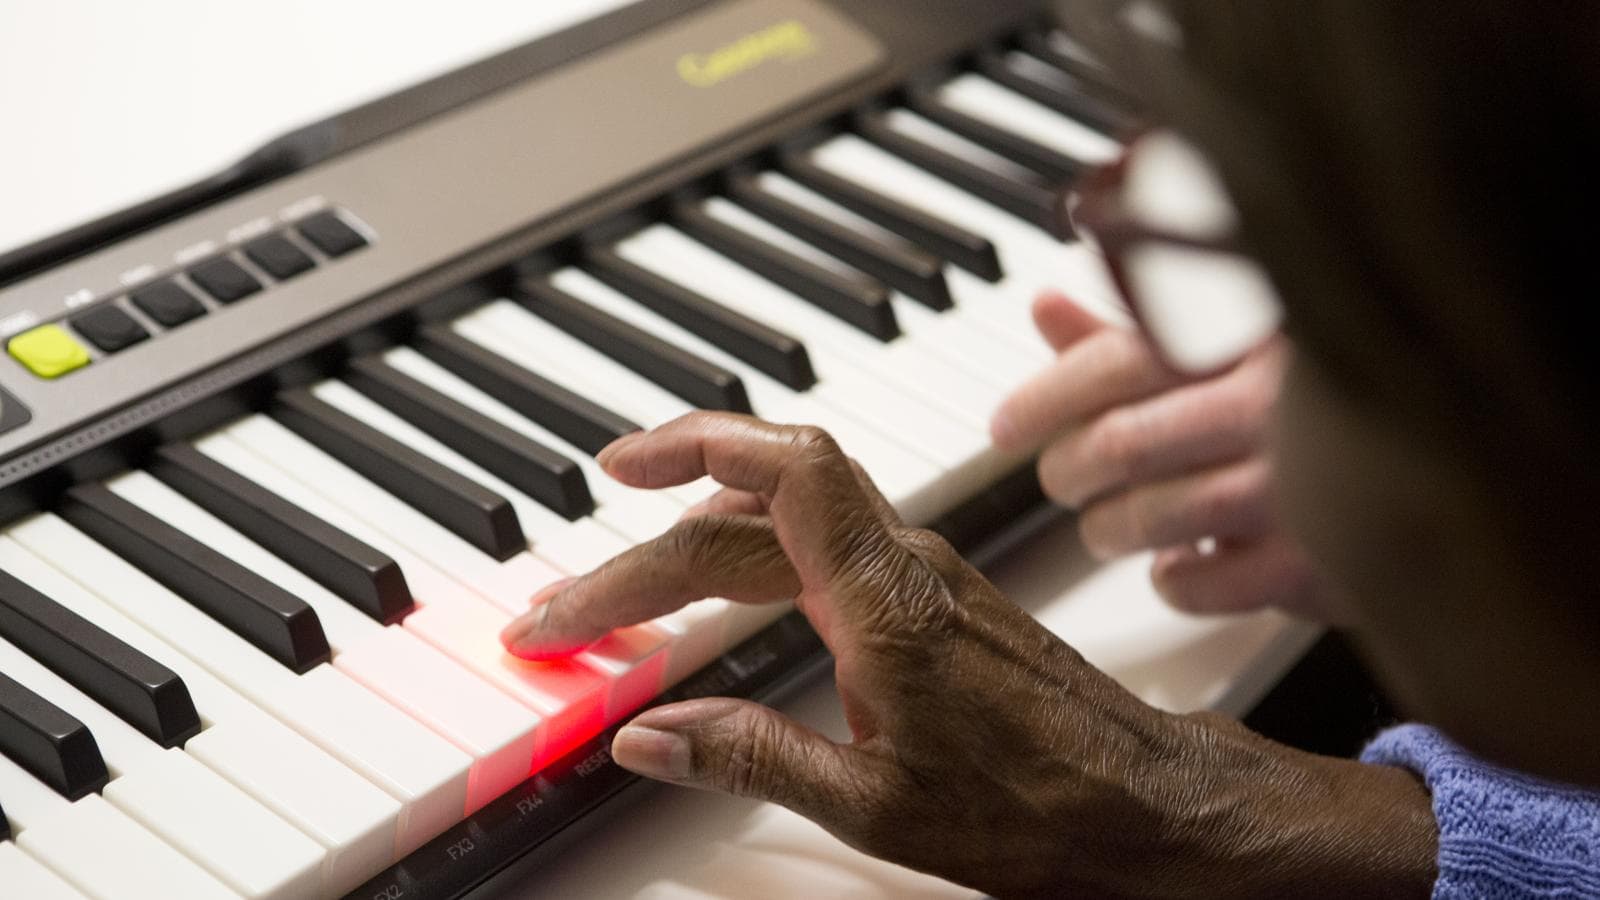 Woman plays a note on the Casio keyboard and the key lights up